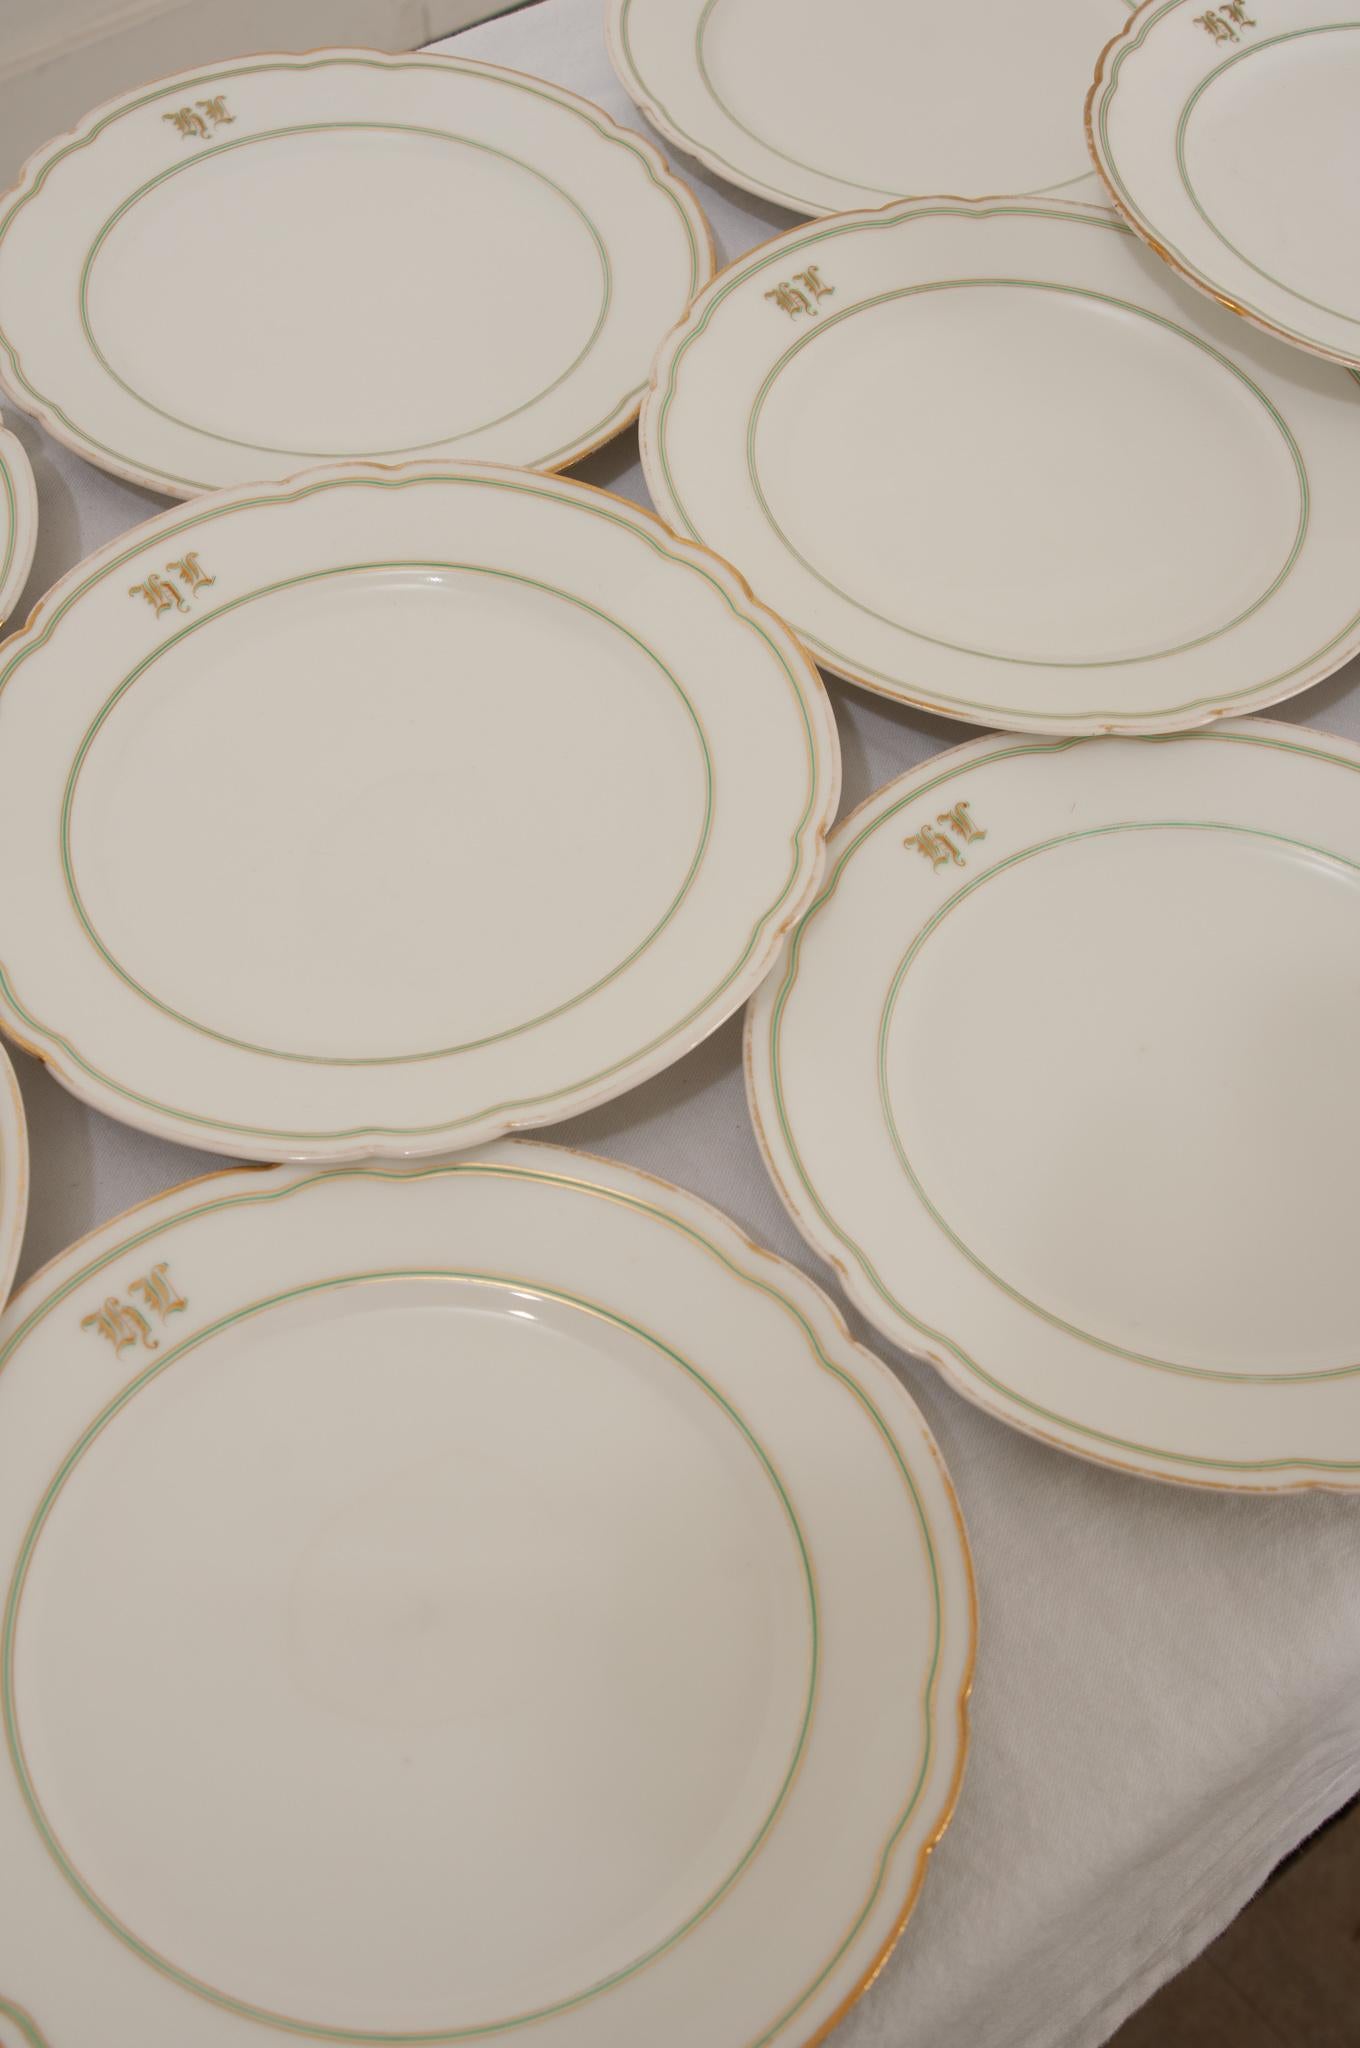 French Old Paris “KL” 16 Piece Service For Sale 1